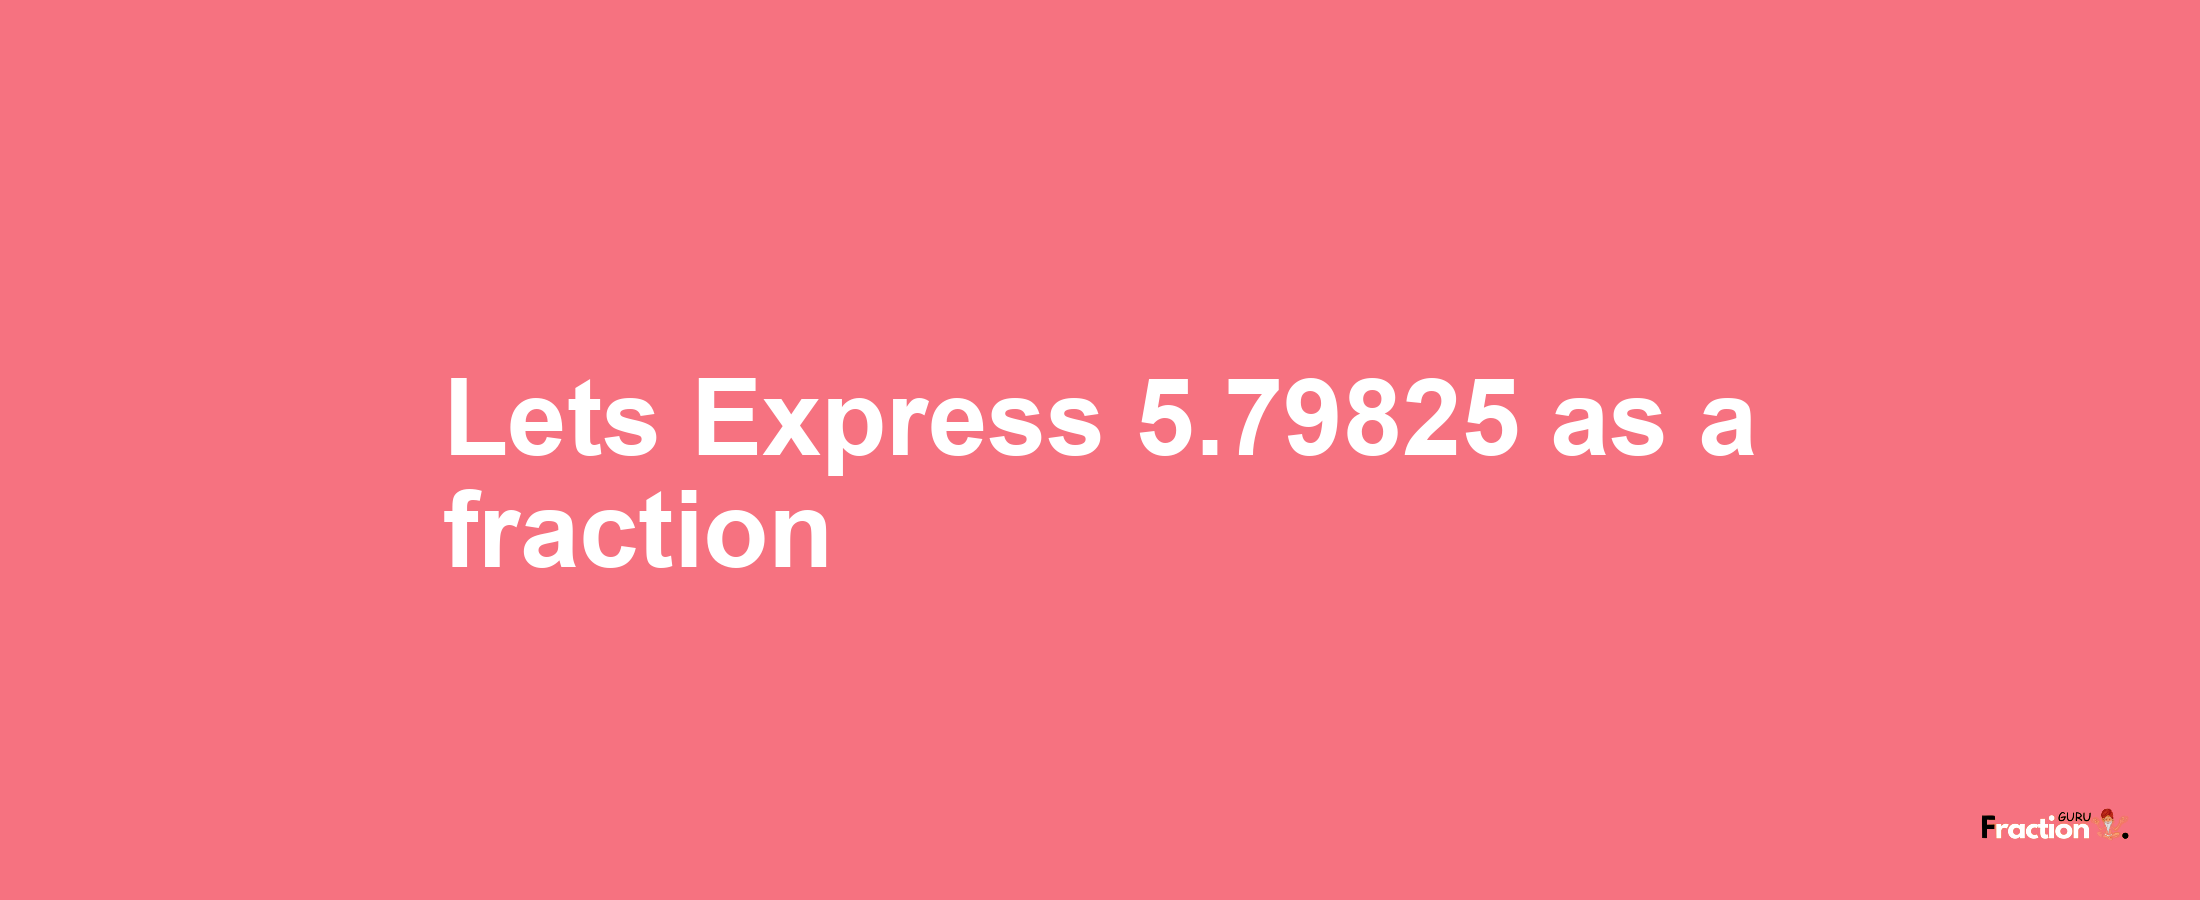 Lets Express 5.79825 as afraction